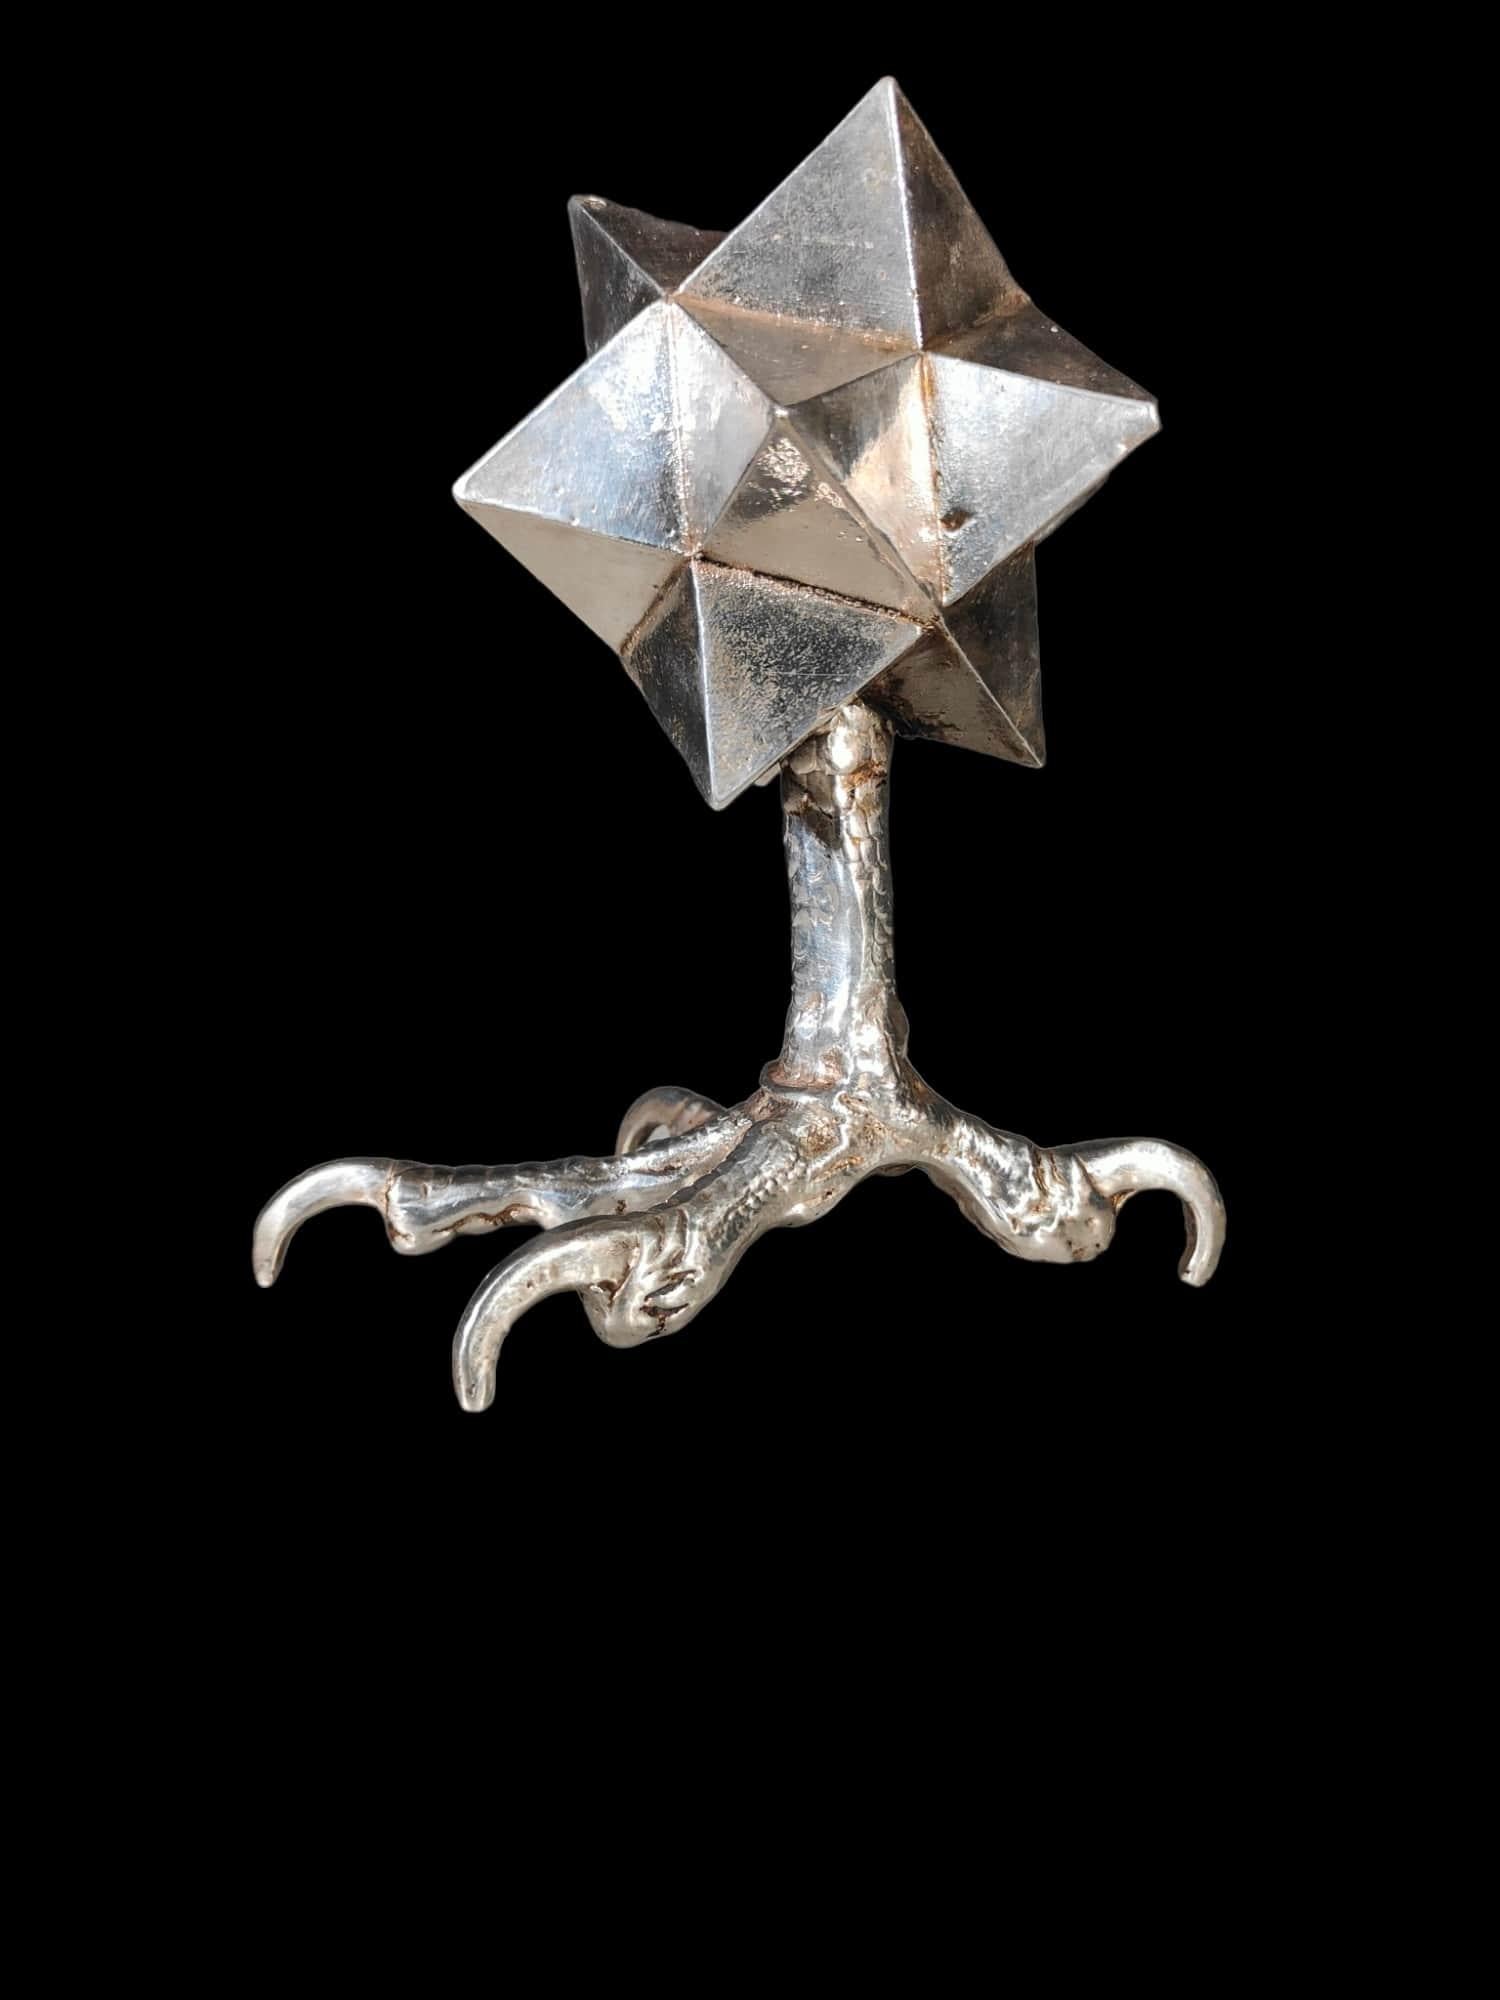 Metallic Polyhedron From The 19th Century – Hexaoctahedron With 48 Faces In Good Condition For Sale In Madrid, ES